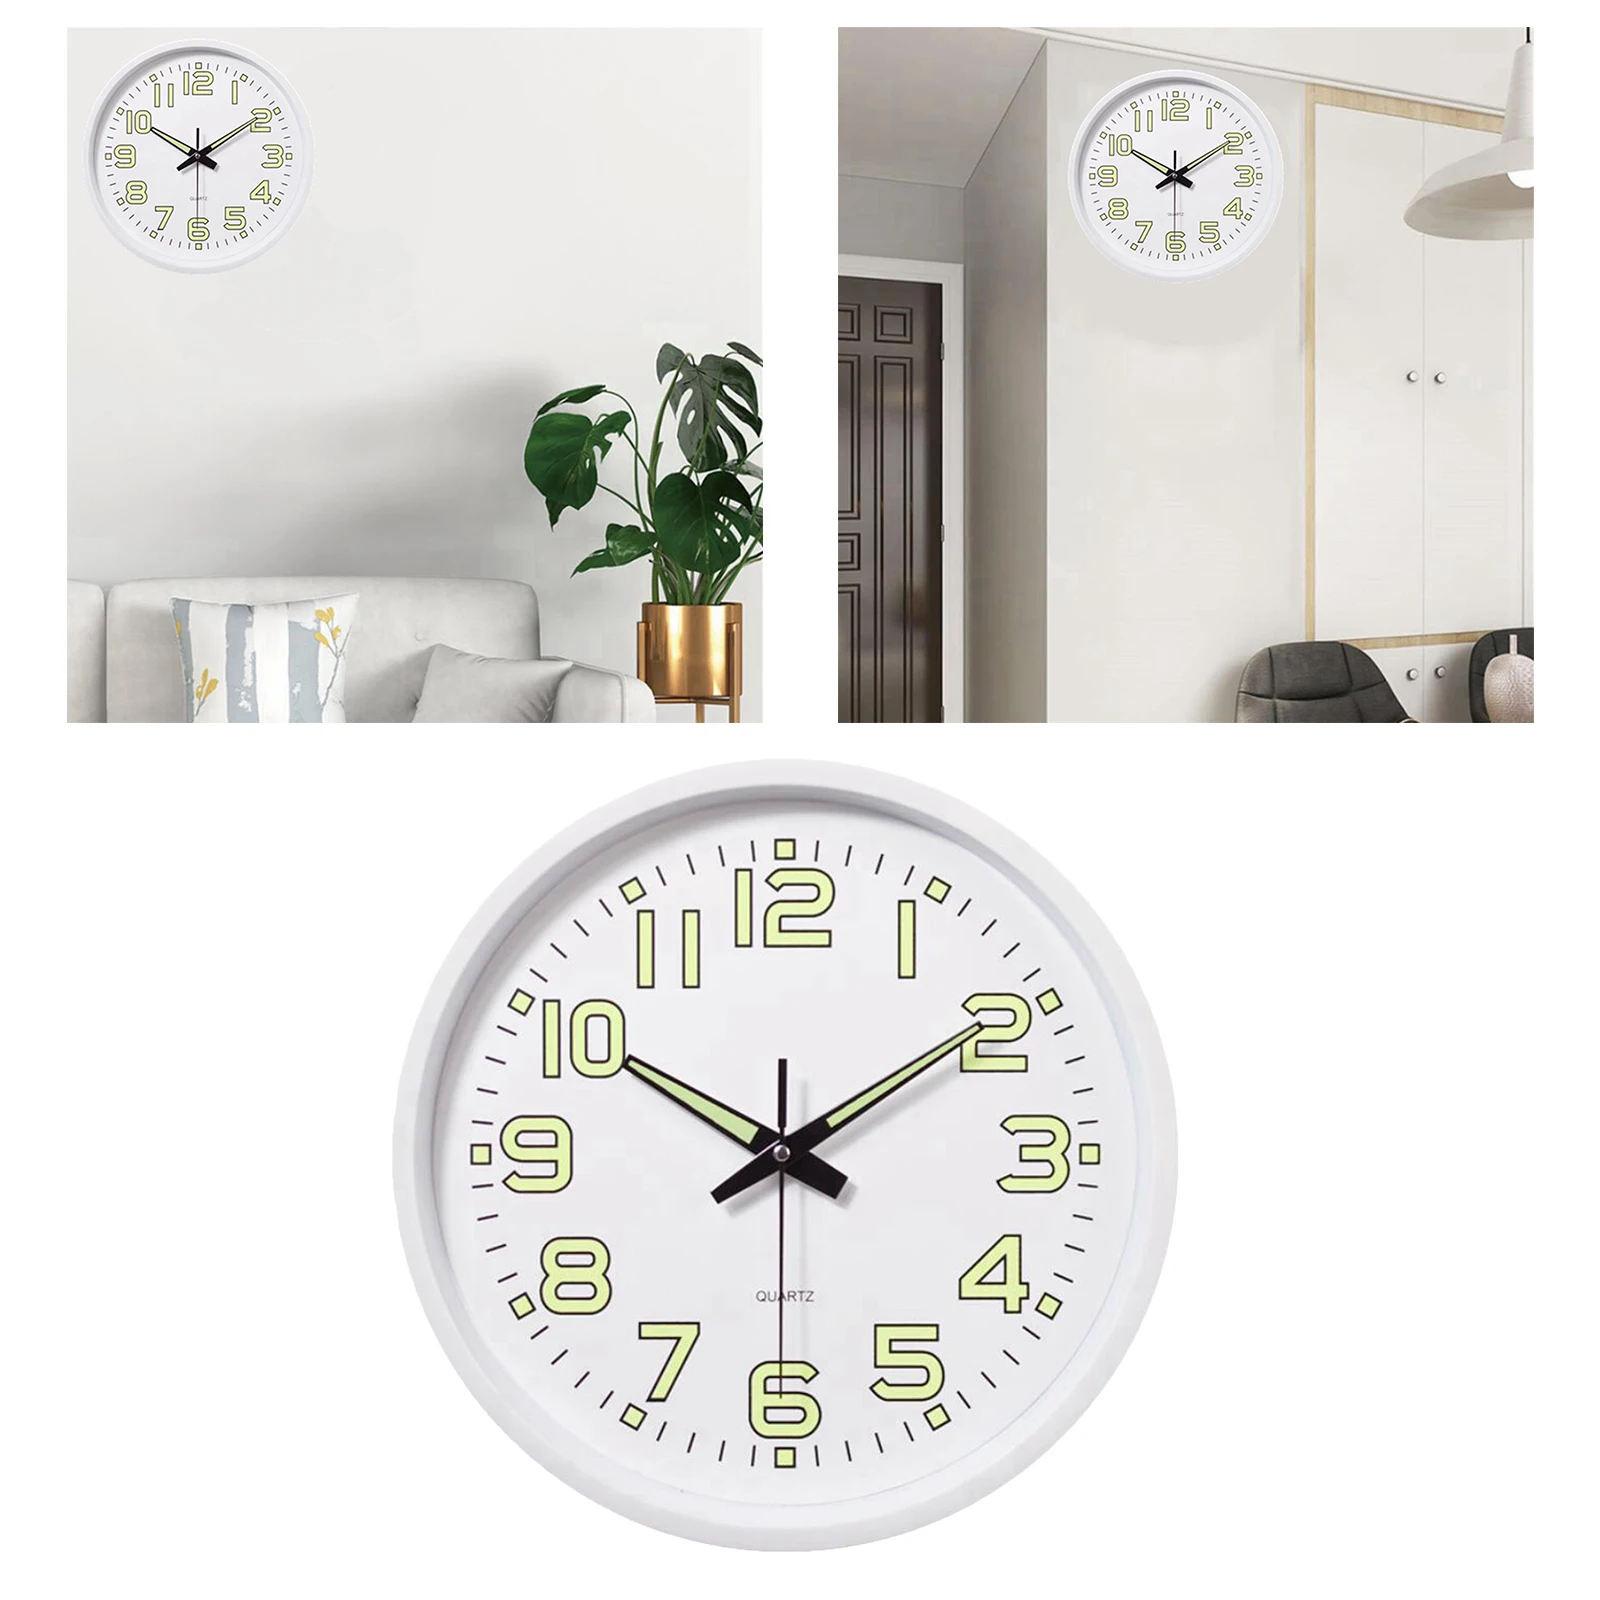 Wall Clocks Night Light Function Quartz Battery Operated Round Easy to Read